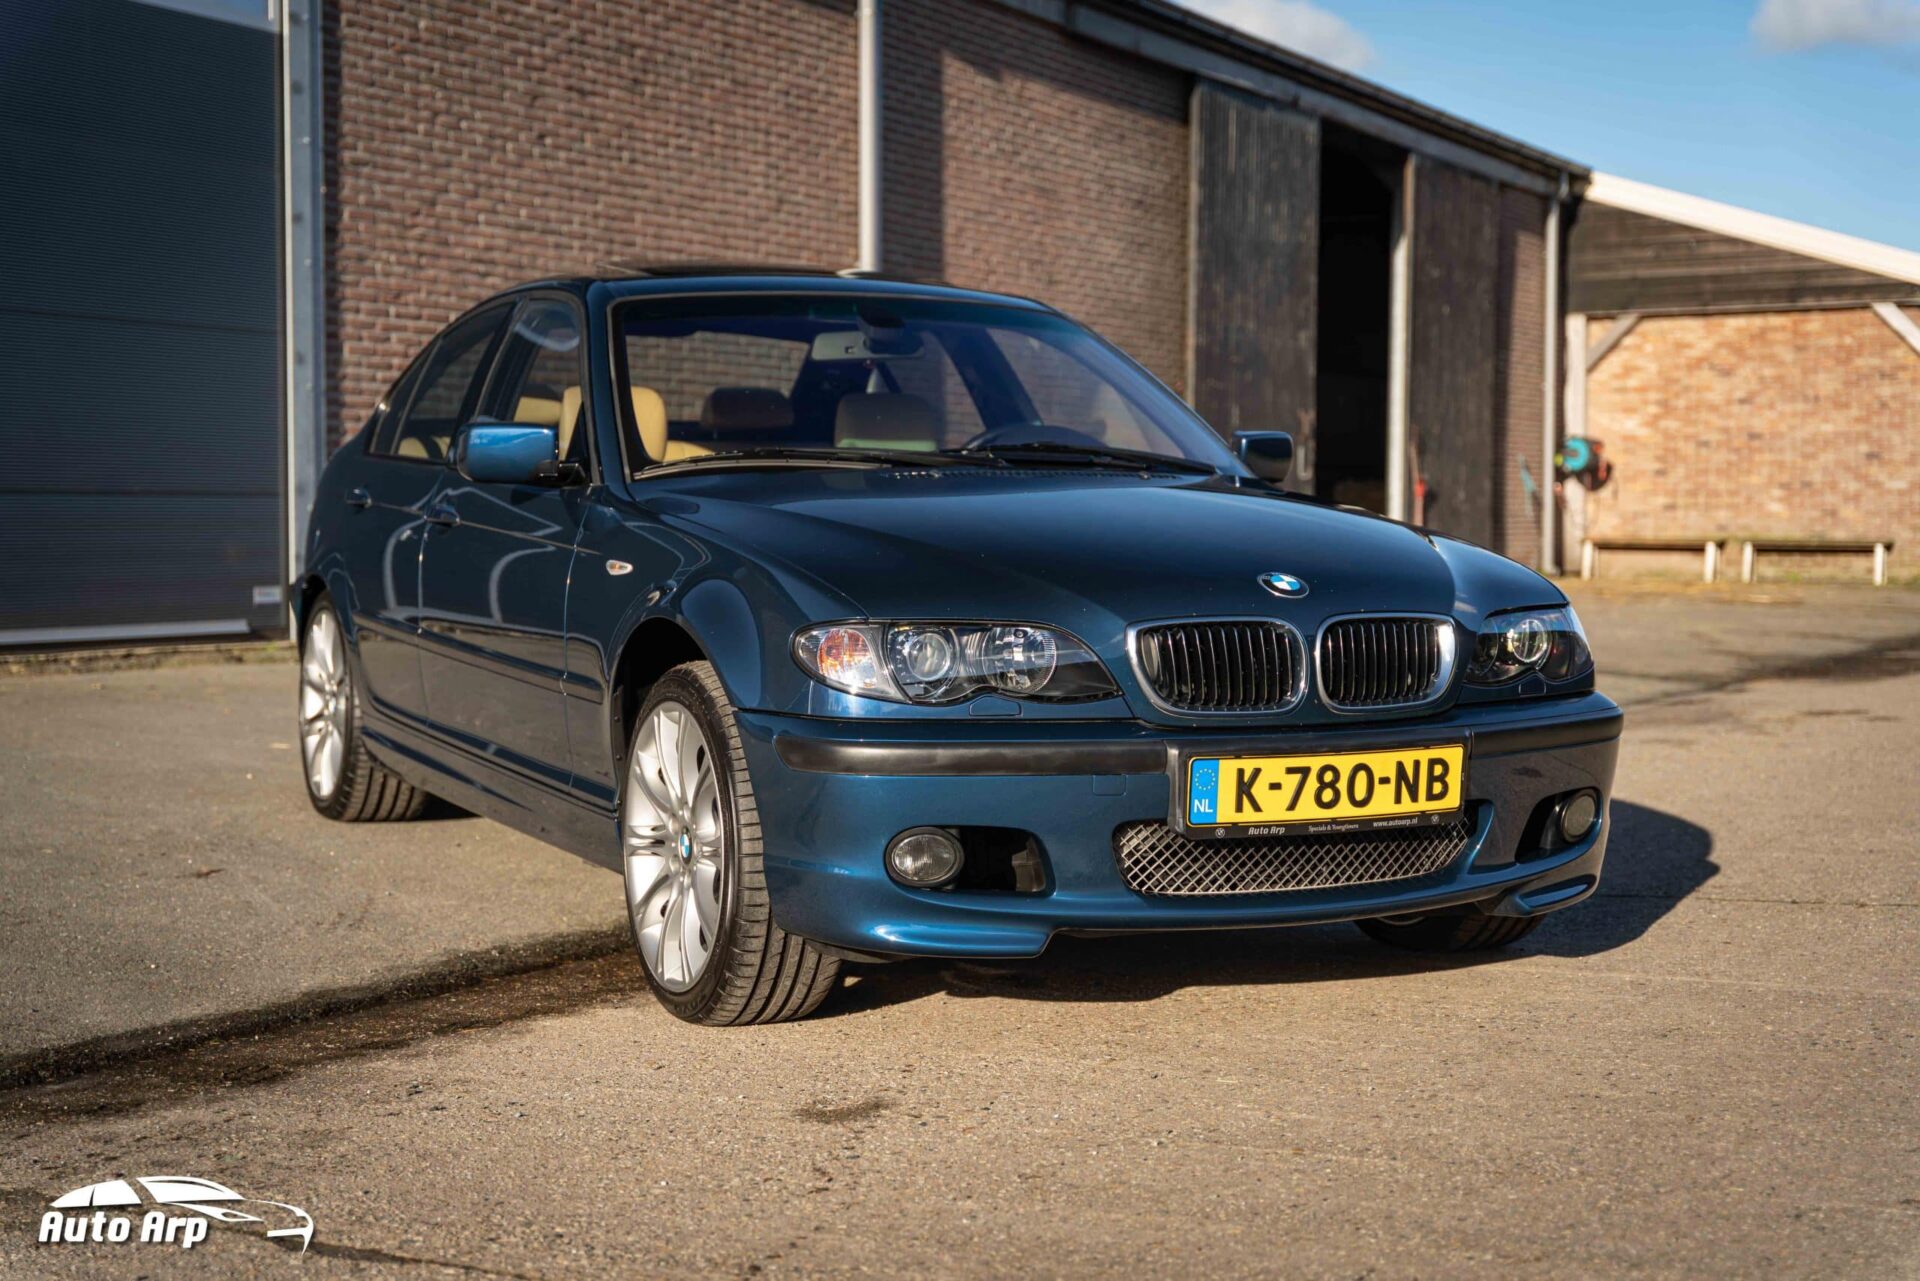 Bmw E46 330Xi With Factory M-Package | Auto Arp